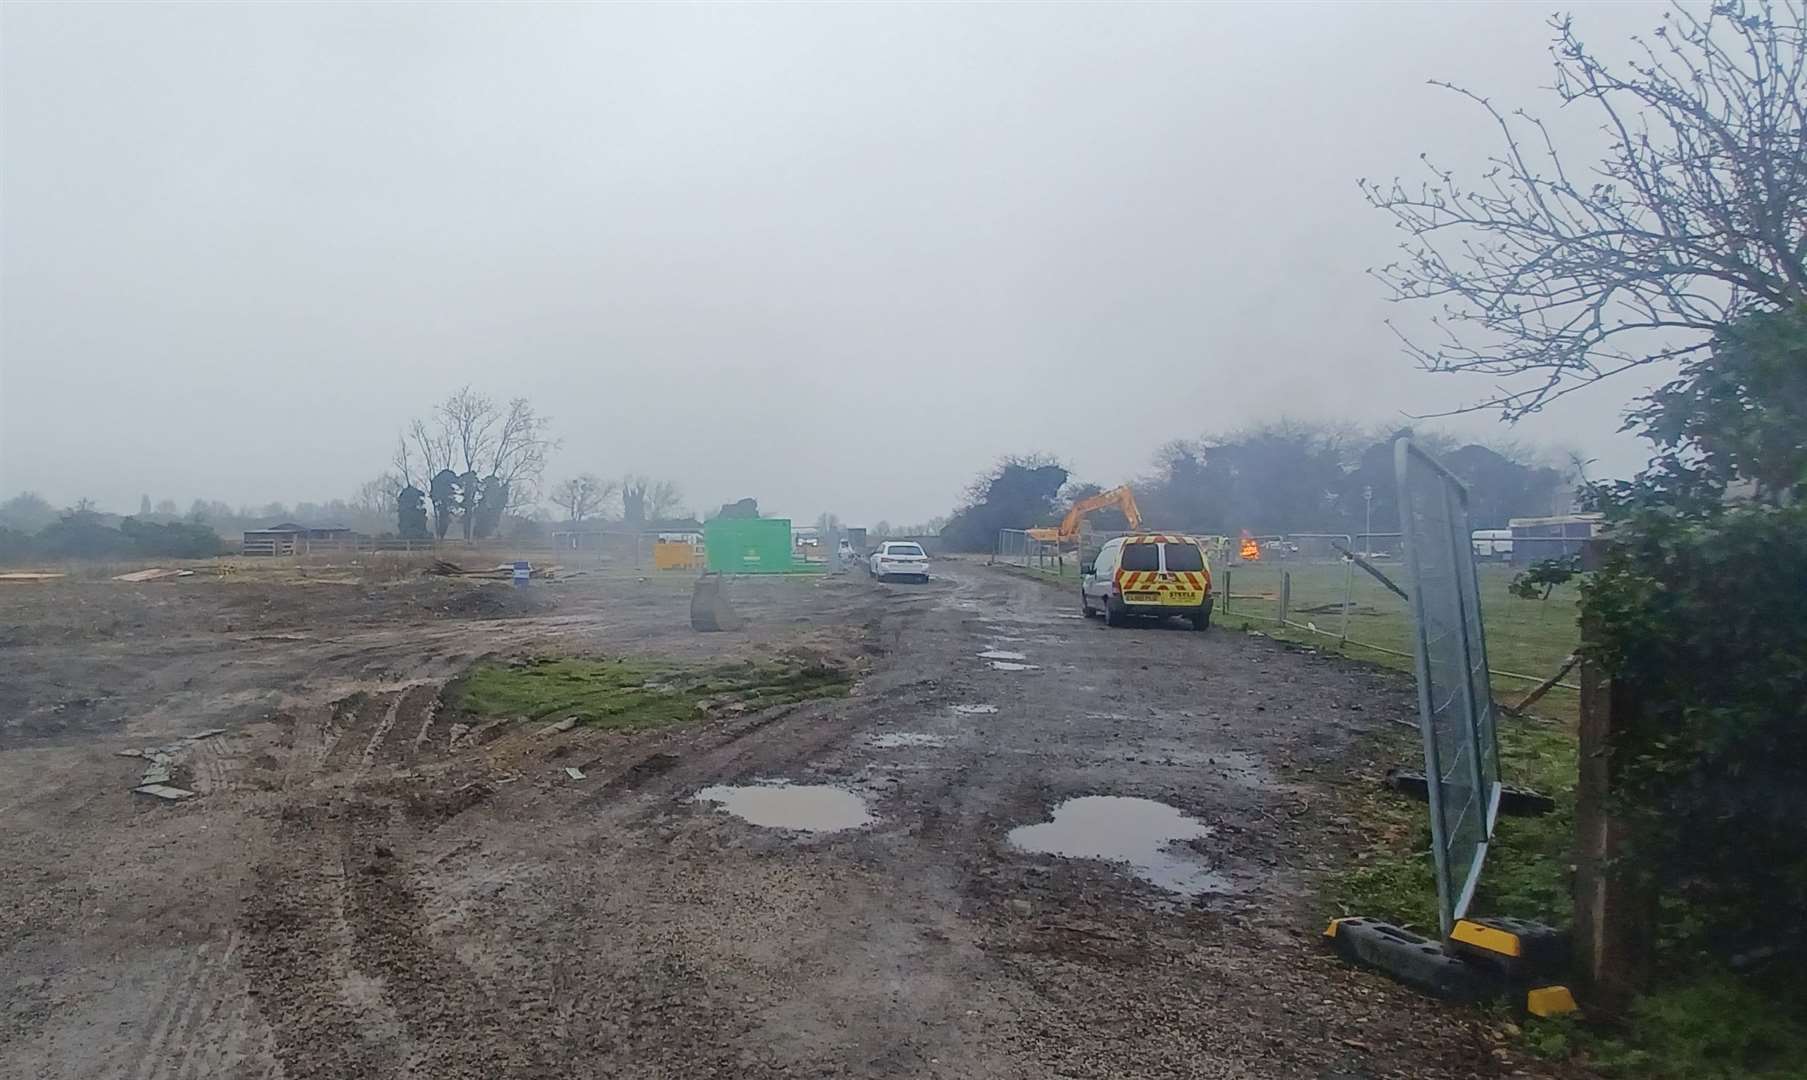 There was smoke billowing from a bonfire as work continued to clear the site